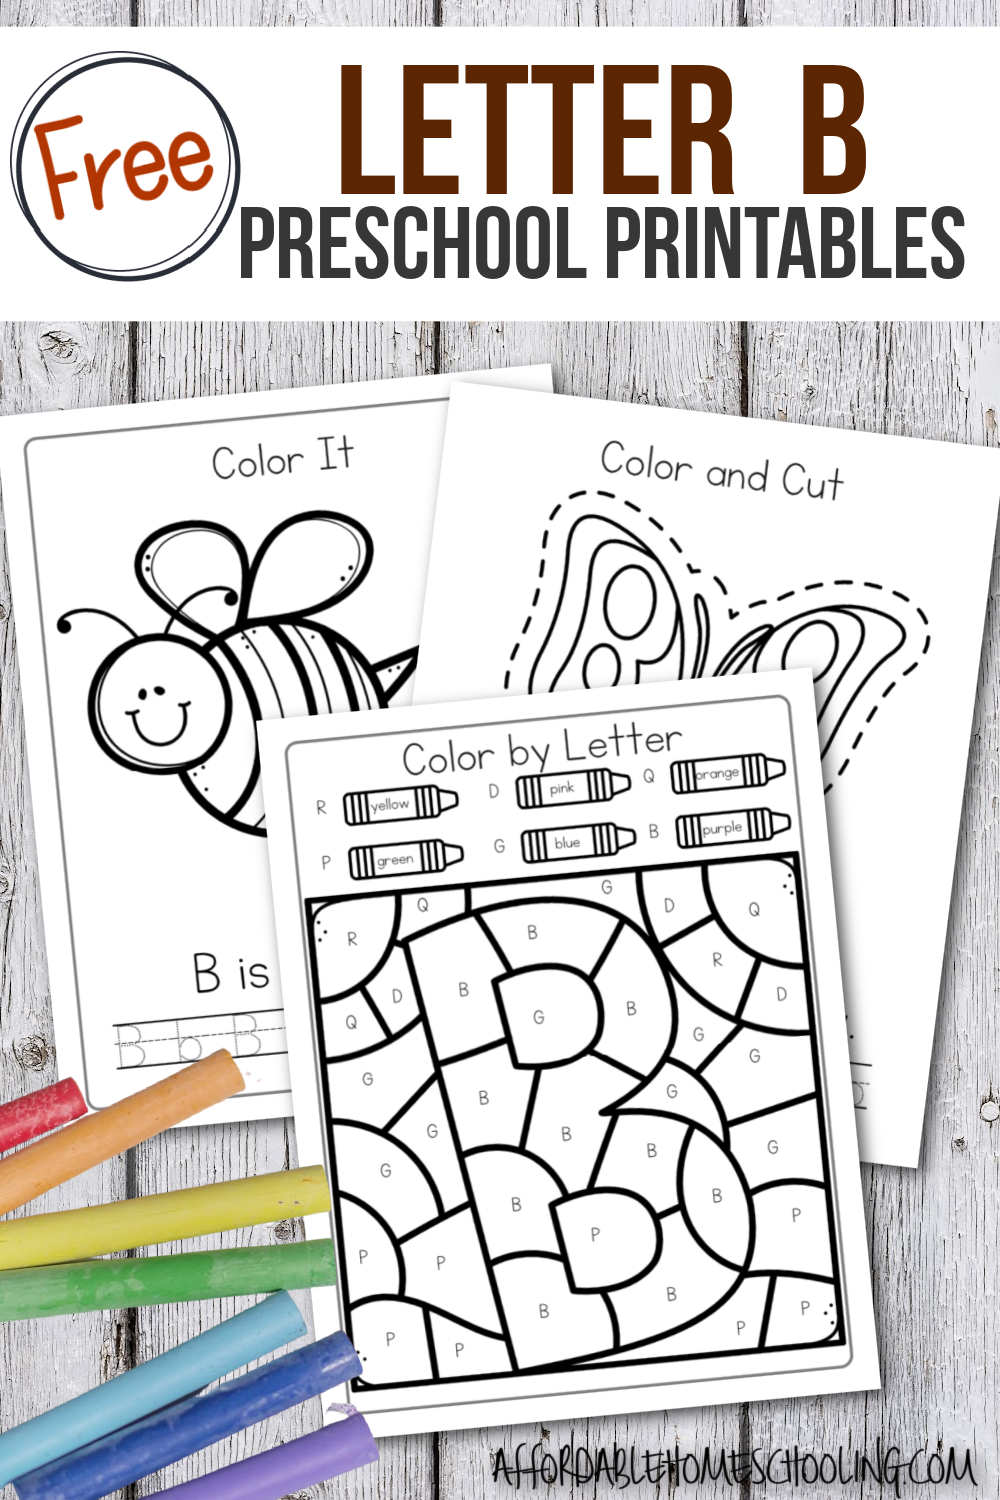 Free printable letter b worksheets letter of the week